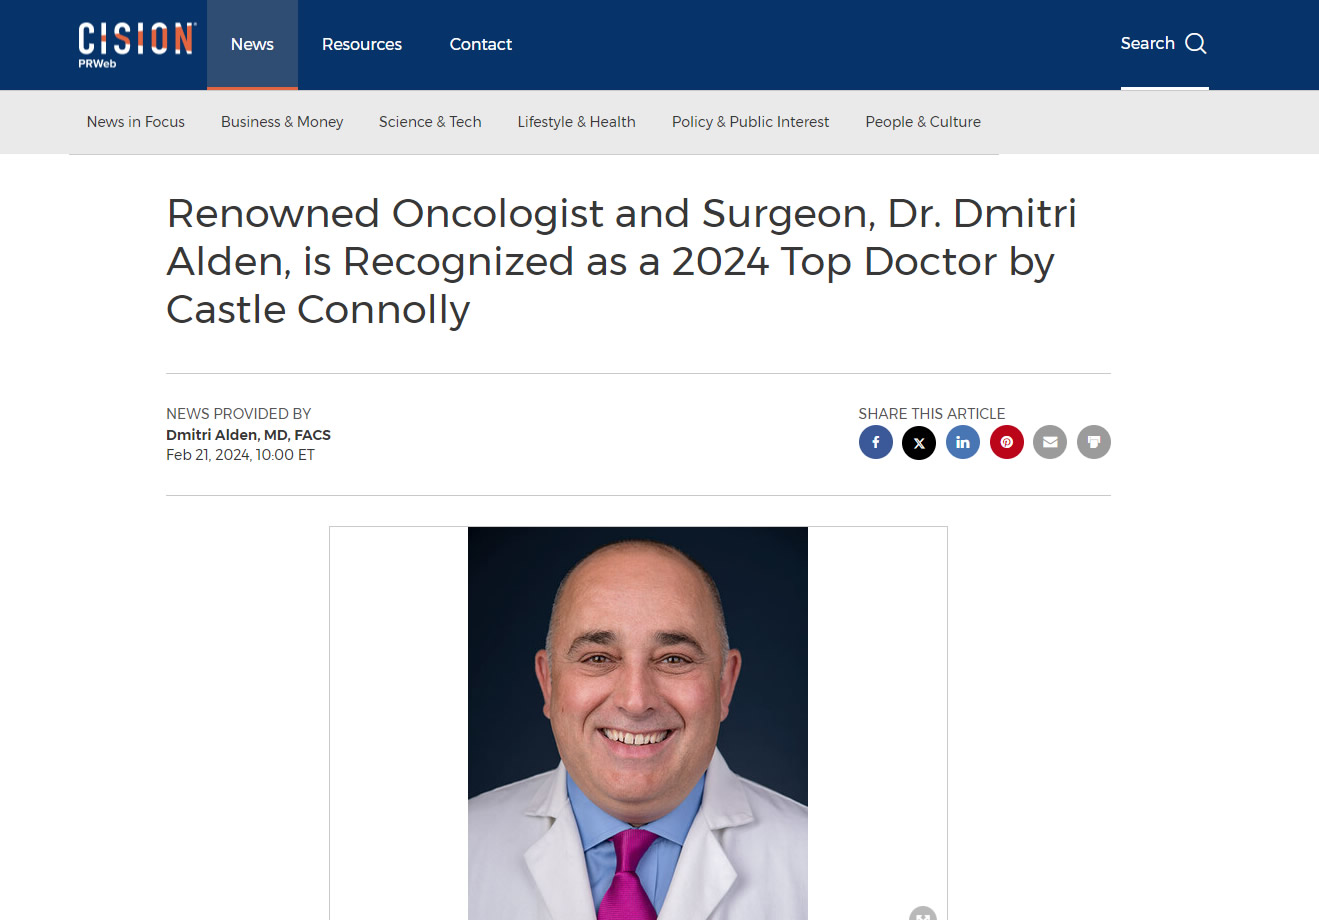 screenshot of the article titled: Renowned Oncologist and Surgeon, Dr. Dmitri Alden, is Recognized as a 2024 Top Doctor by Castle Connolly